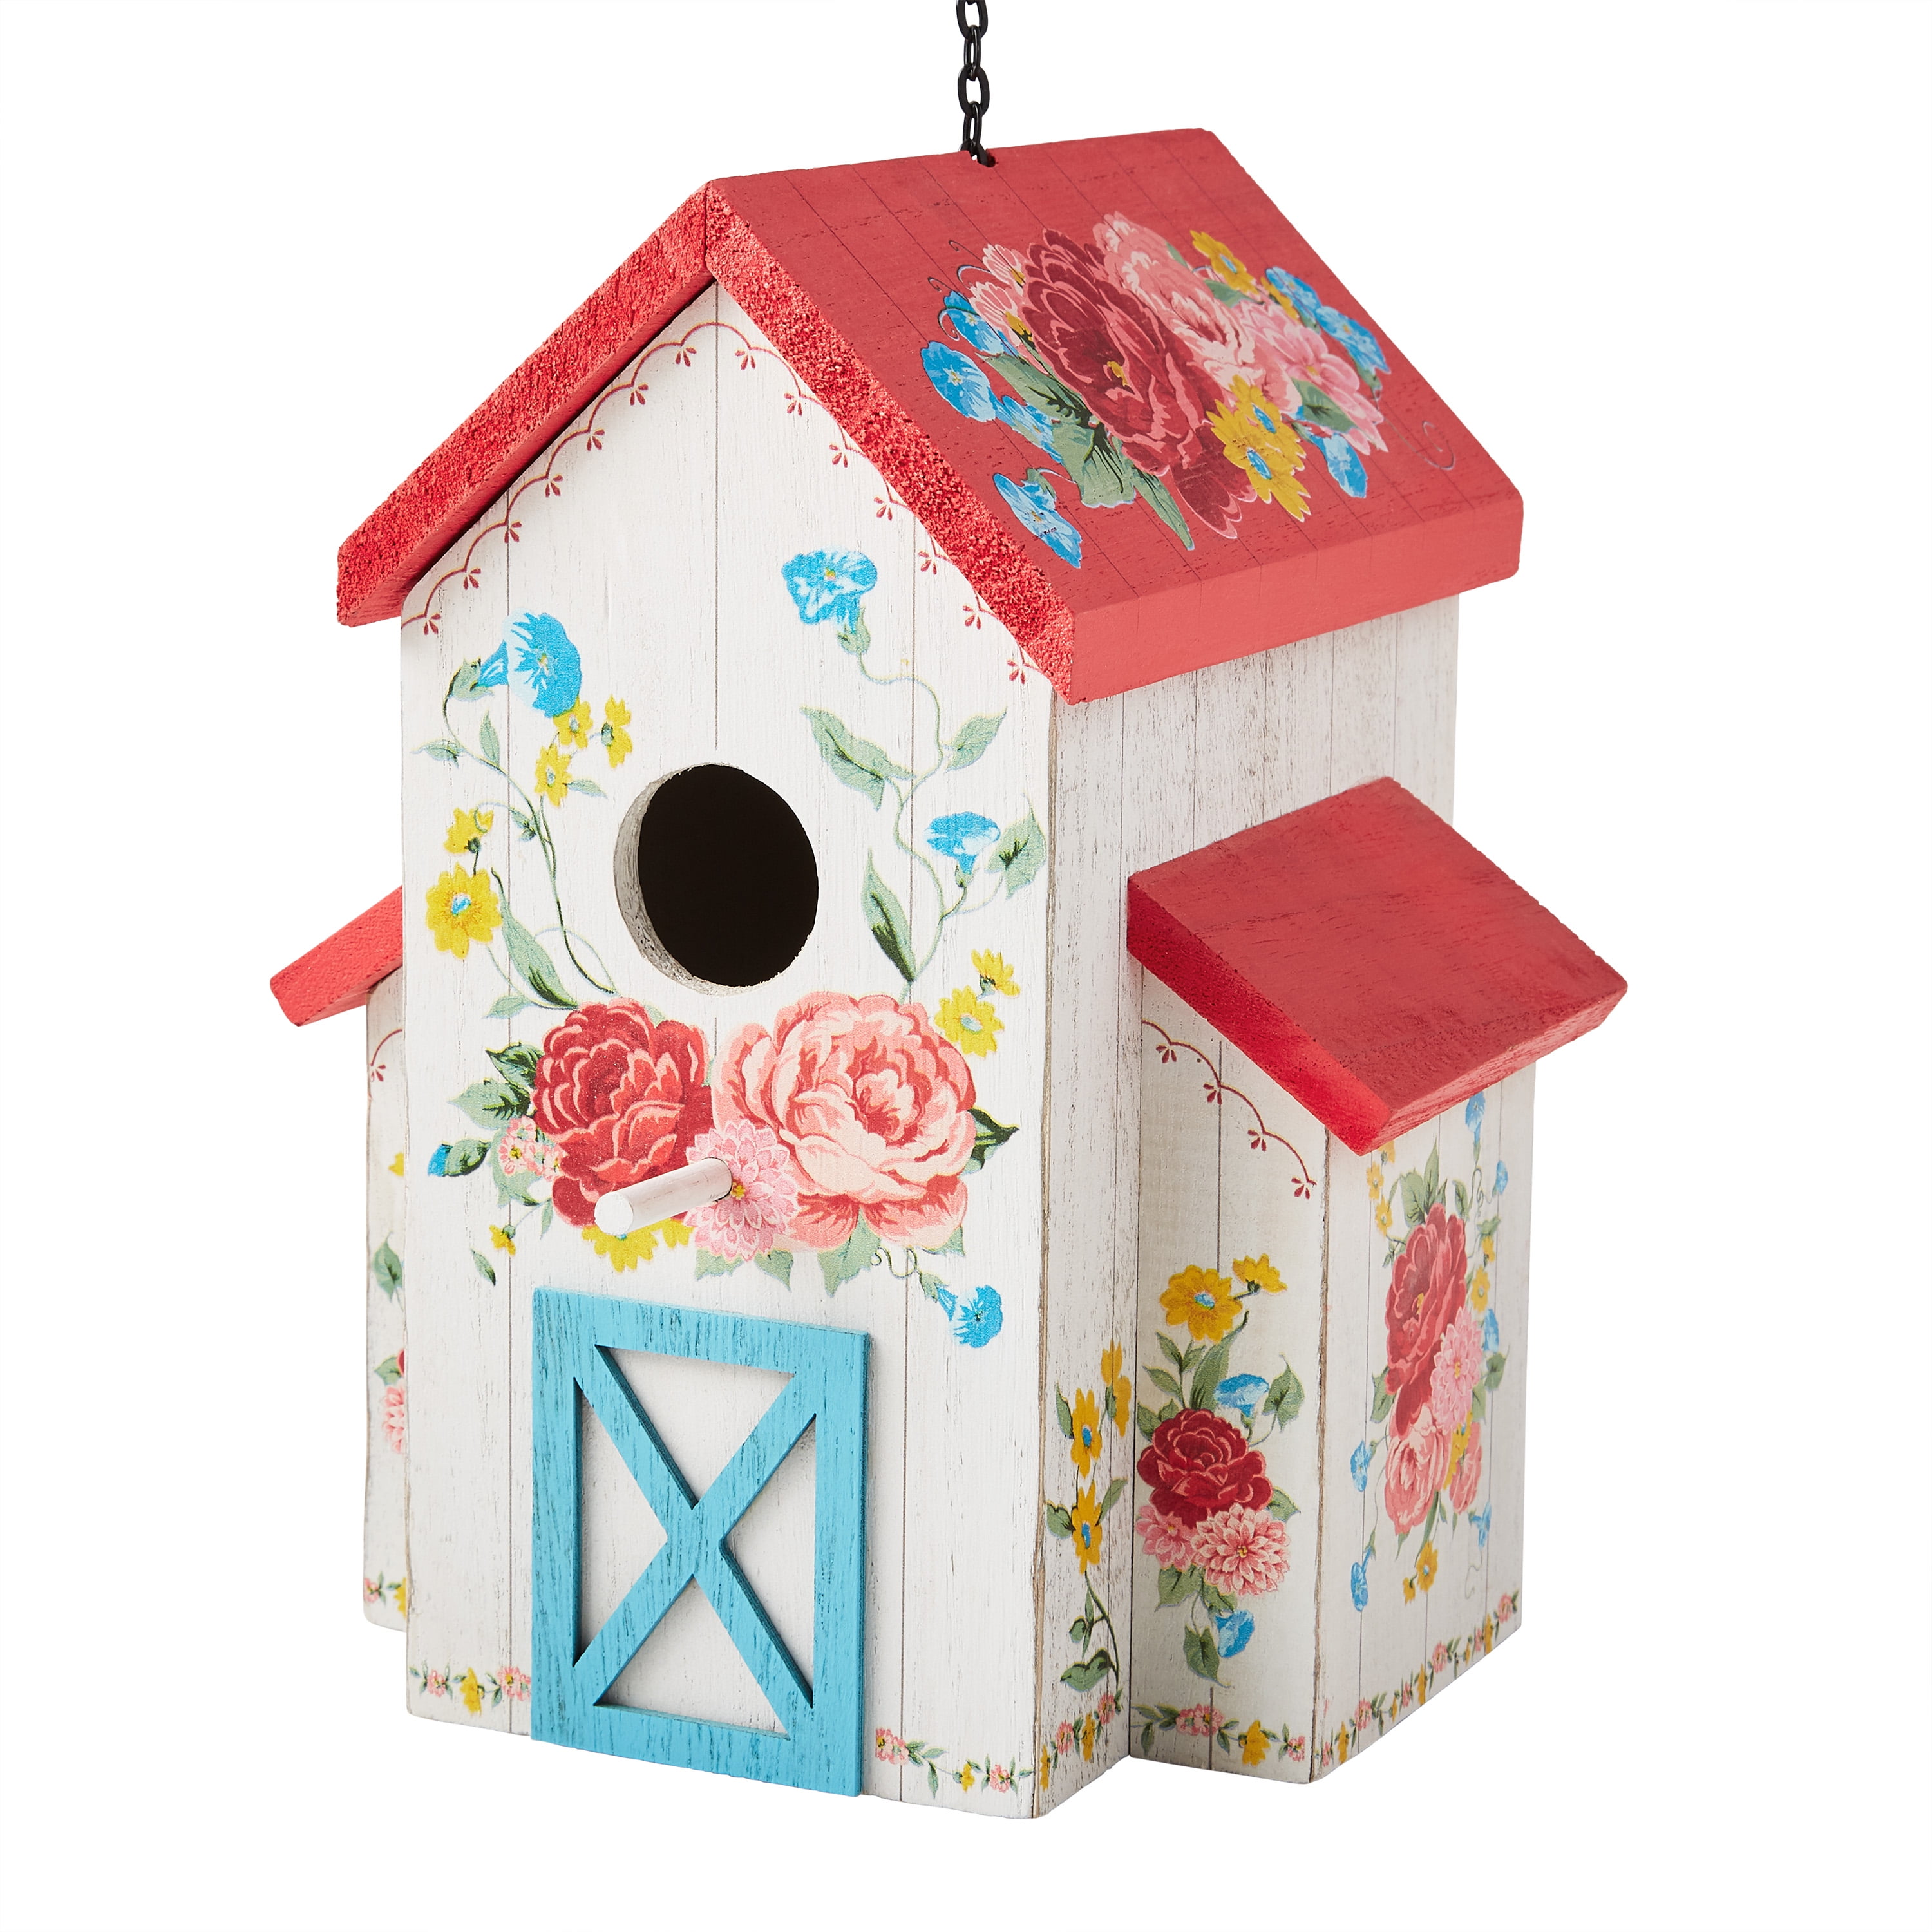 4-COMPARTMENT  BLUE & WHITE BARN BIRD HOUSE ....FREE SHIPPING 